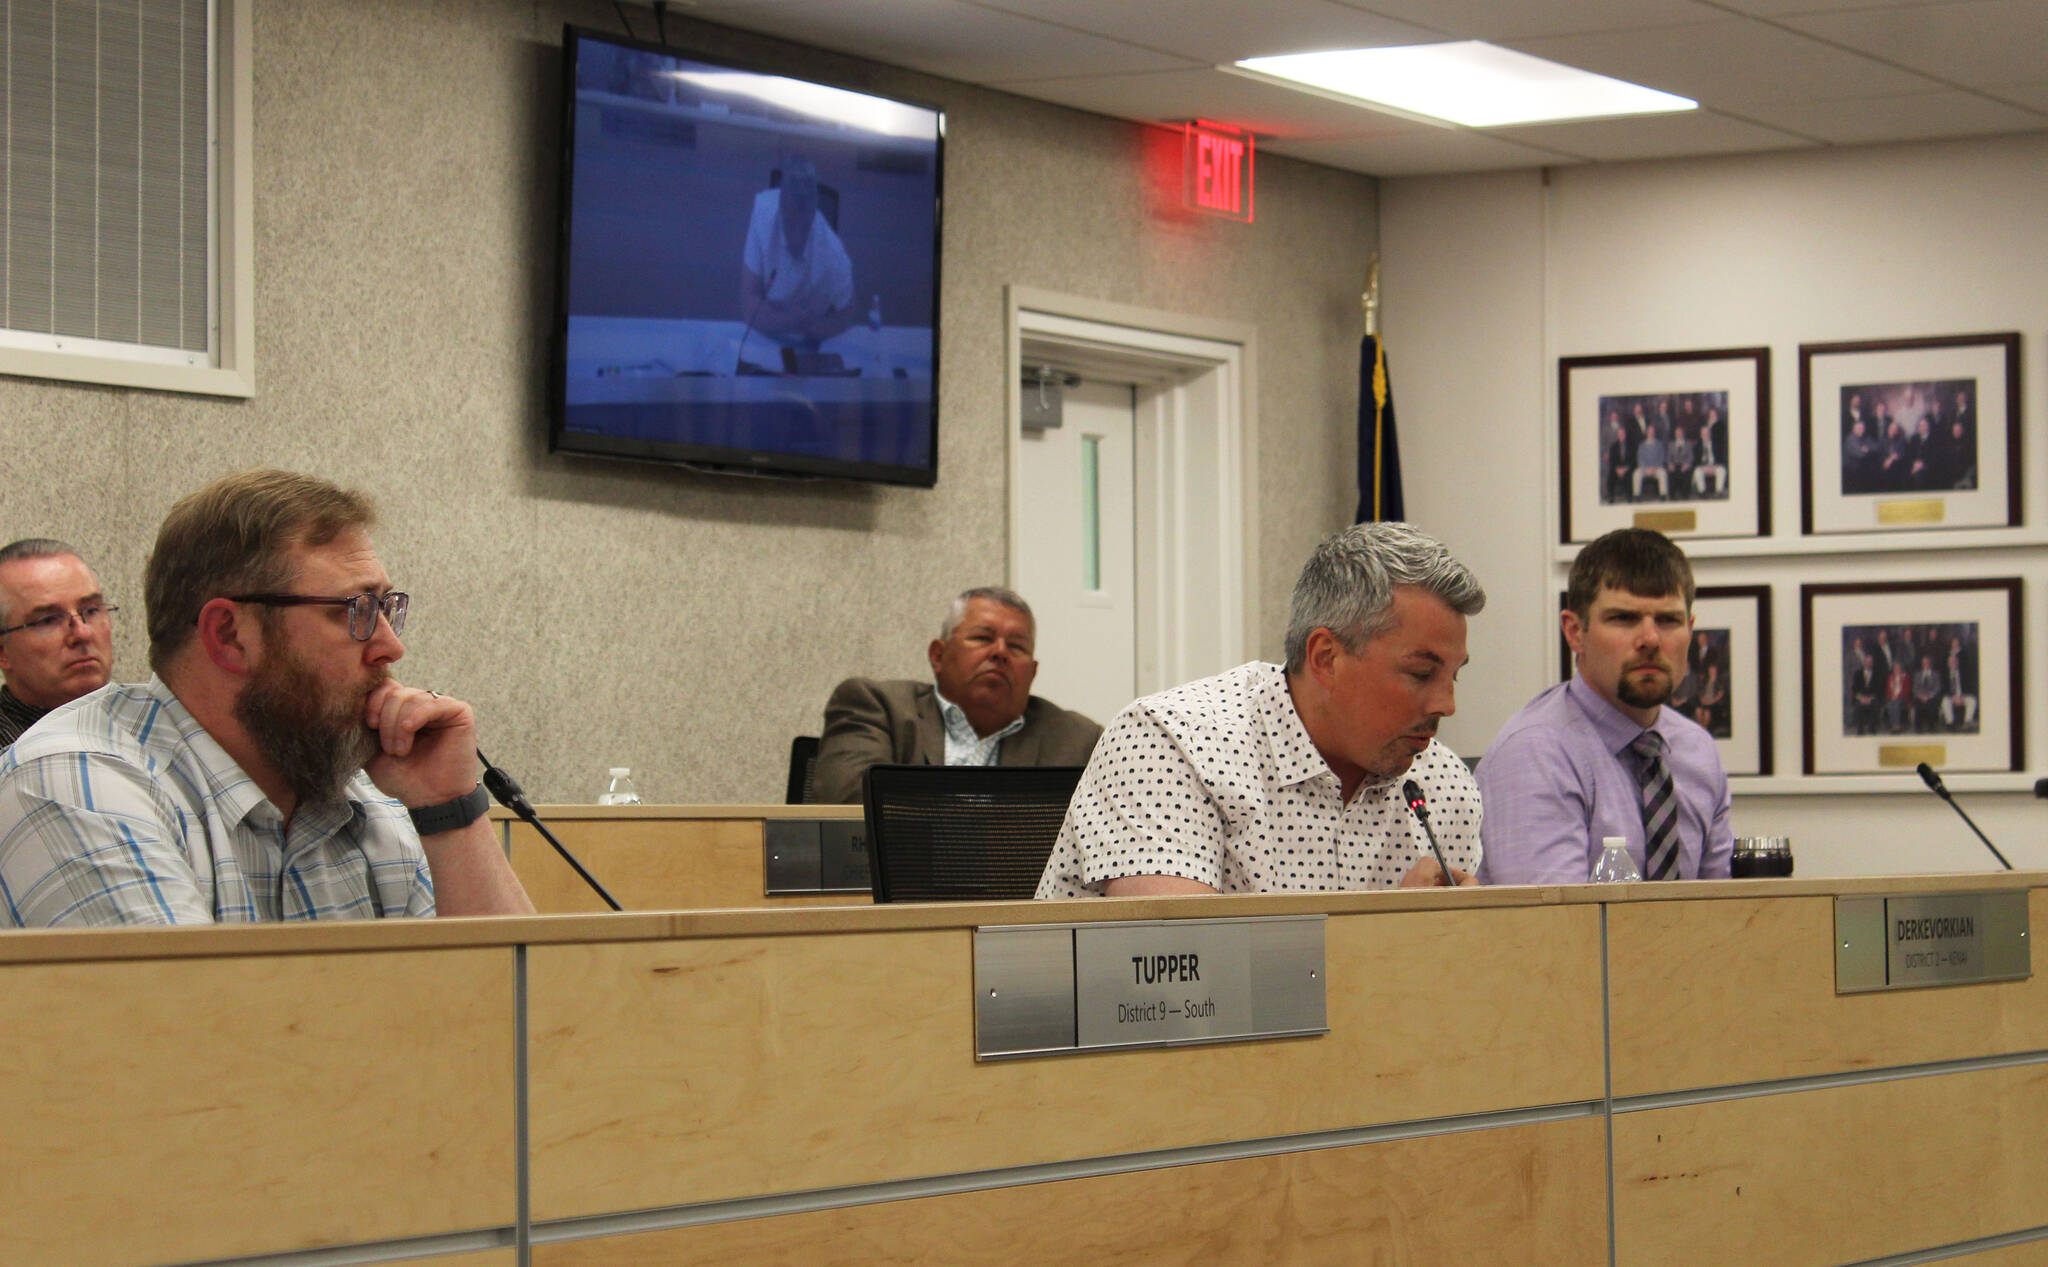 Assembly member Richard Derkevorkian (second from right) speaks during a meeting of the Kenai Peninsula Borough Assembly on Tuesday, May 3, 2022, in Soldotna, Alaska. (Ashlyn O’Hara/Peninsula Clarion)